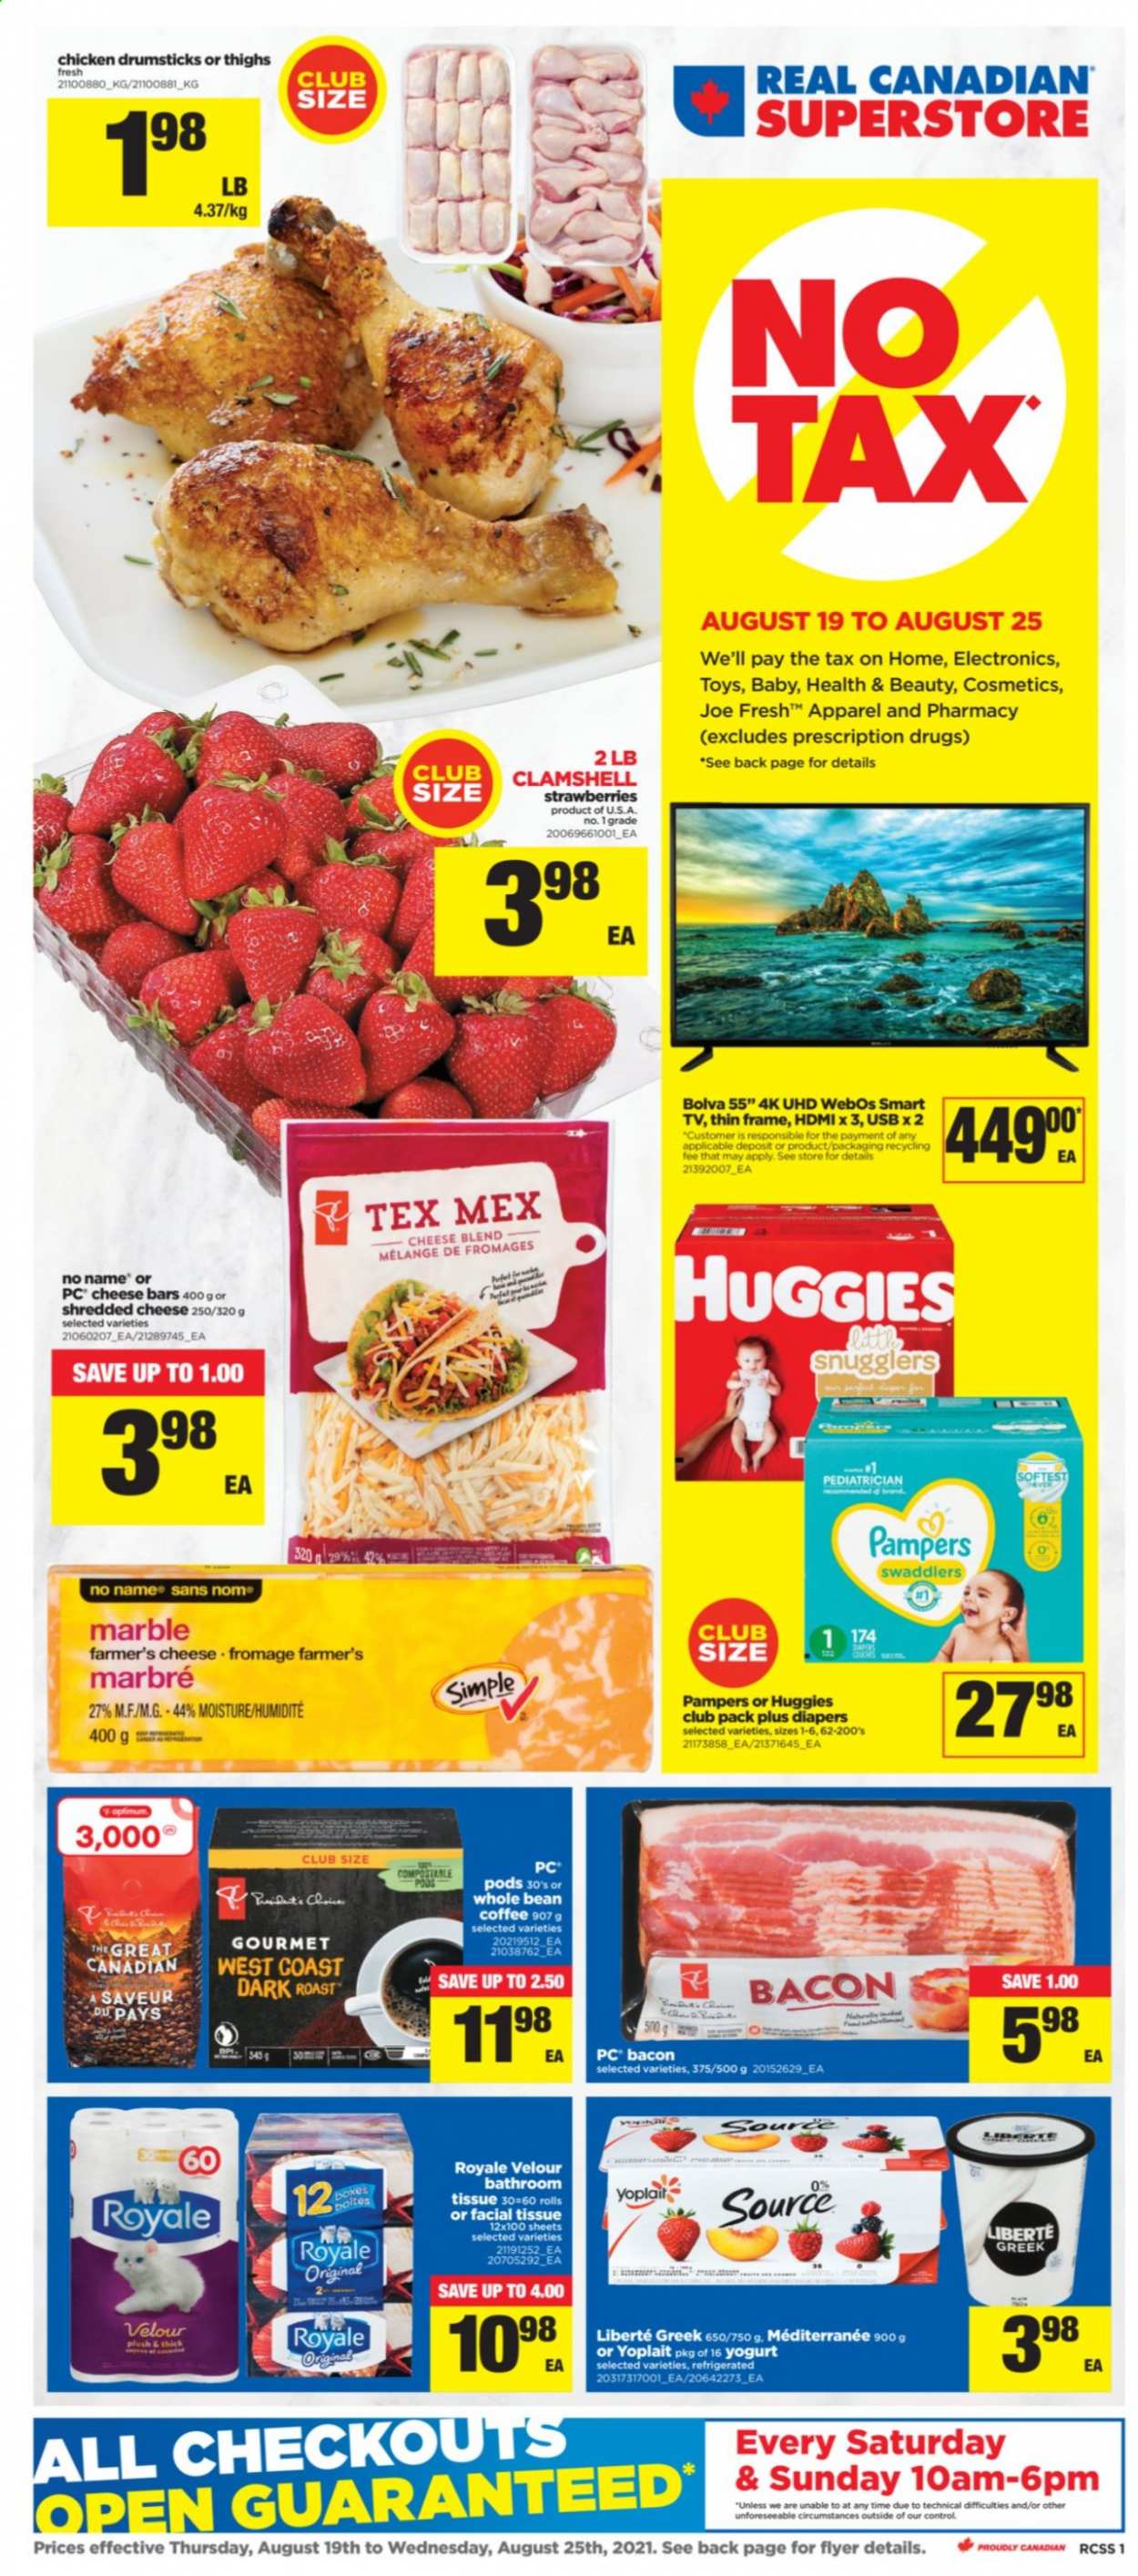 thumbnail - Real Canadian Superstore Flyer - August 19, 2021 - August 25, 2021 - Sales products - webos, strawberries, No Name, bacon, shredded cheese, yoghurt, Yoplait, coffee, chicken drumsticks, chicken, nappies, bath tissue, TV, toys, smart tv, Huggies, Pampers. Page 1.